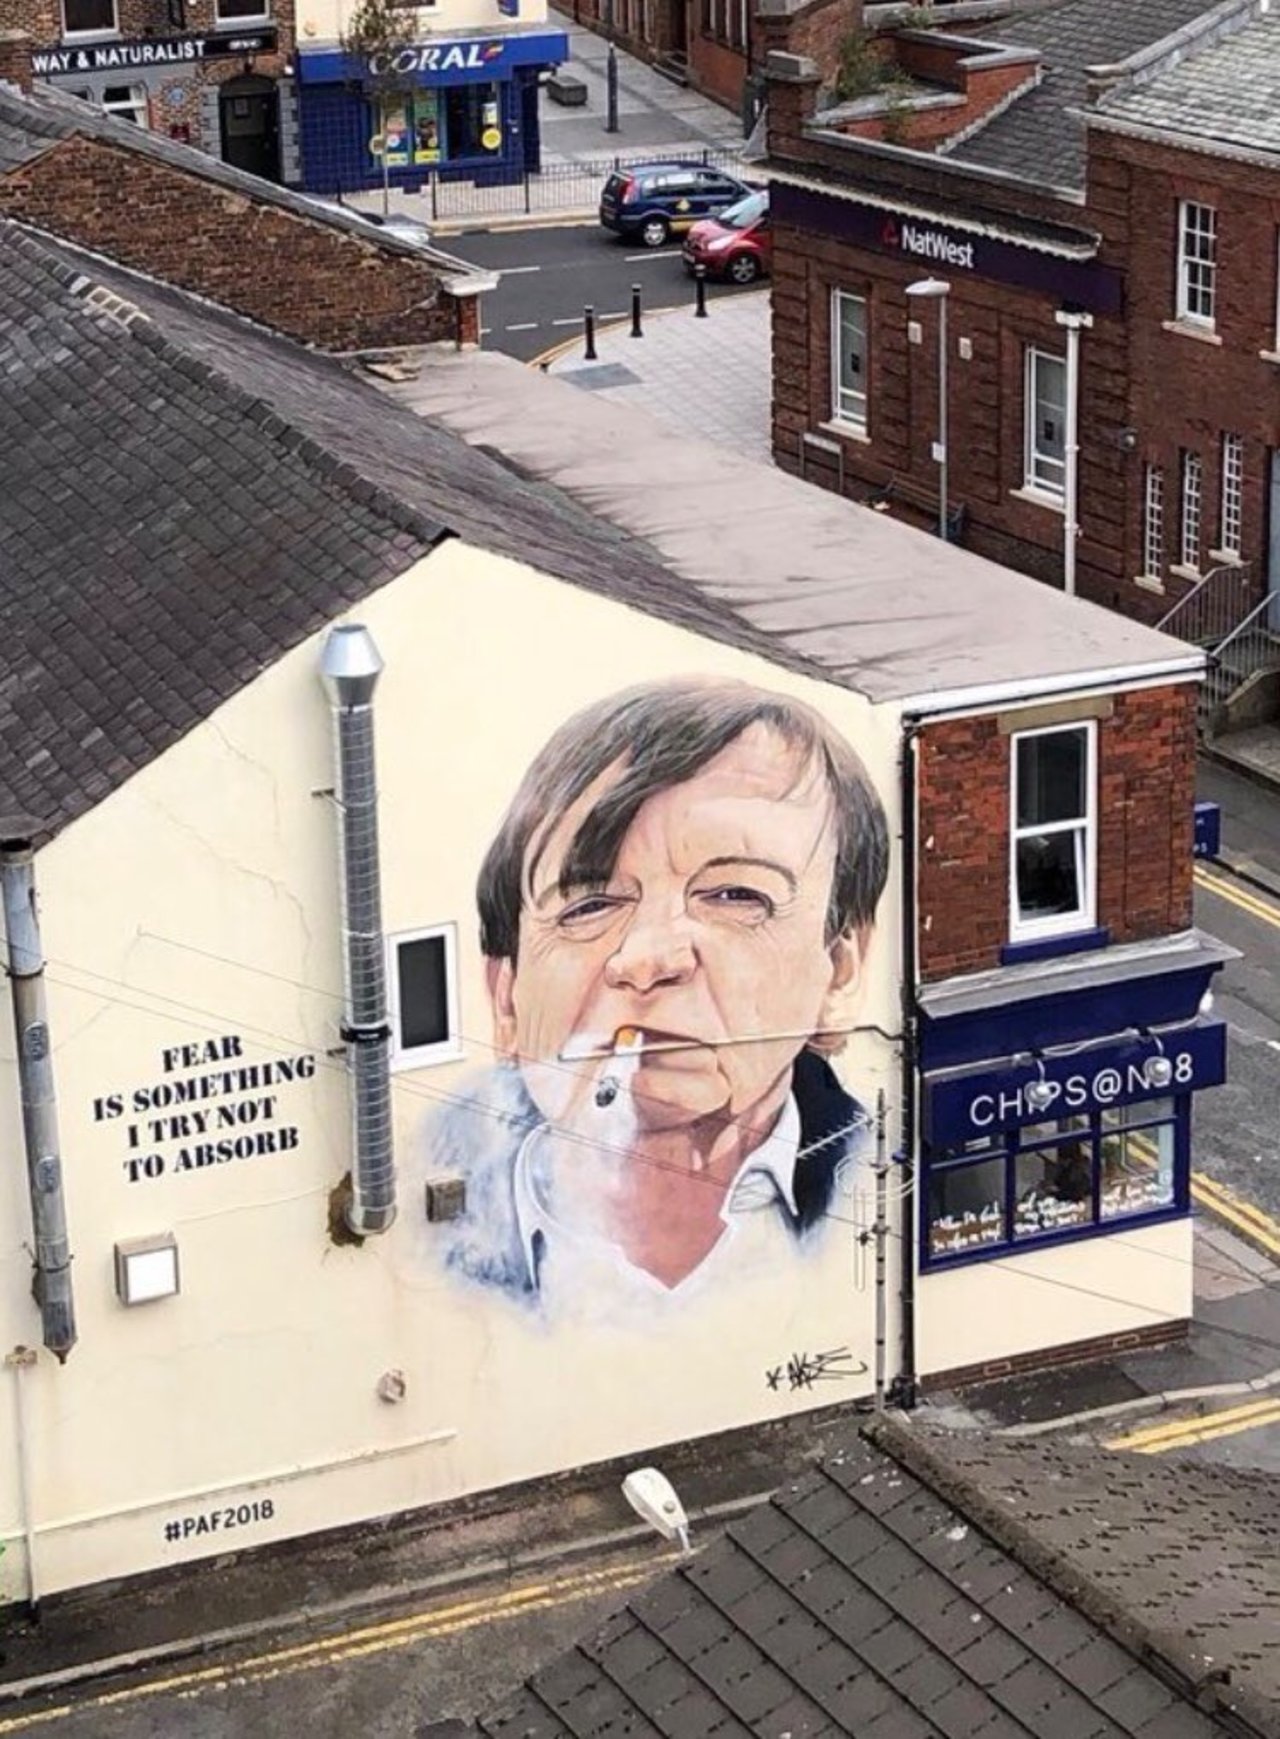 “Fear is something I try to absorb” Aerial view of the brilliant Mark E Smith mural by @Akse_P19  @PwichArtsFest #akse #p19 #graffiti #art #streetart #manchester #mcr #thefall #MarkESmith https://t.co/iSCP5TZWX1